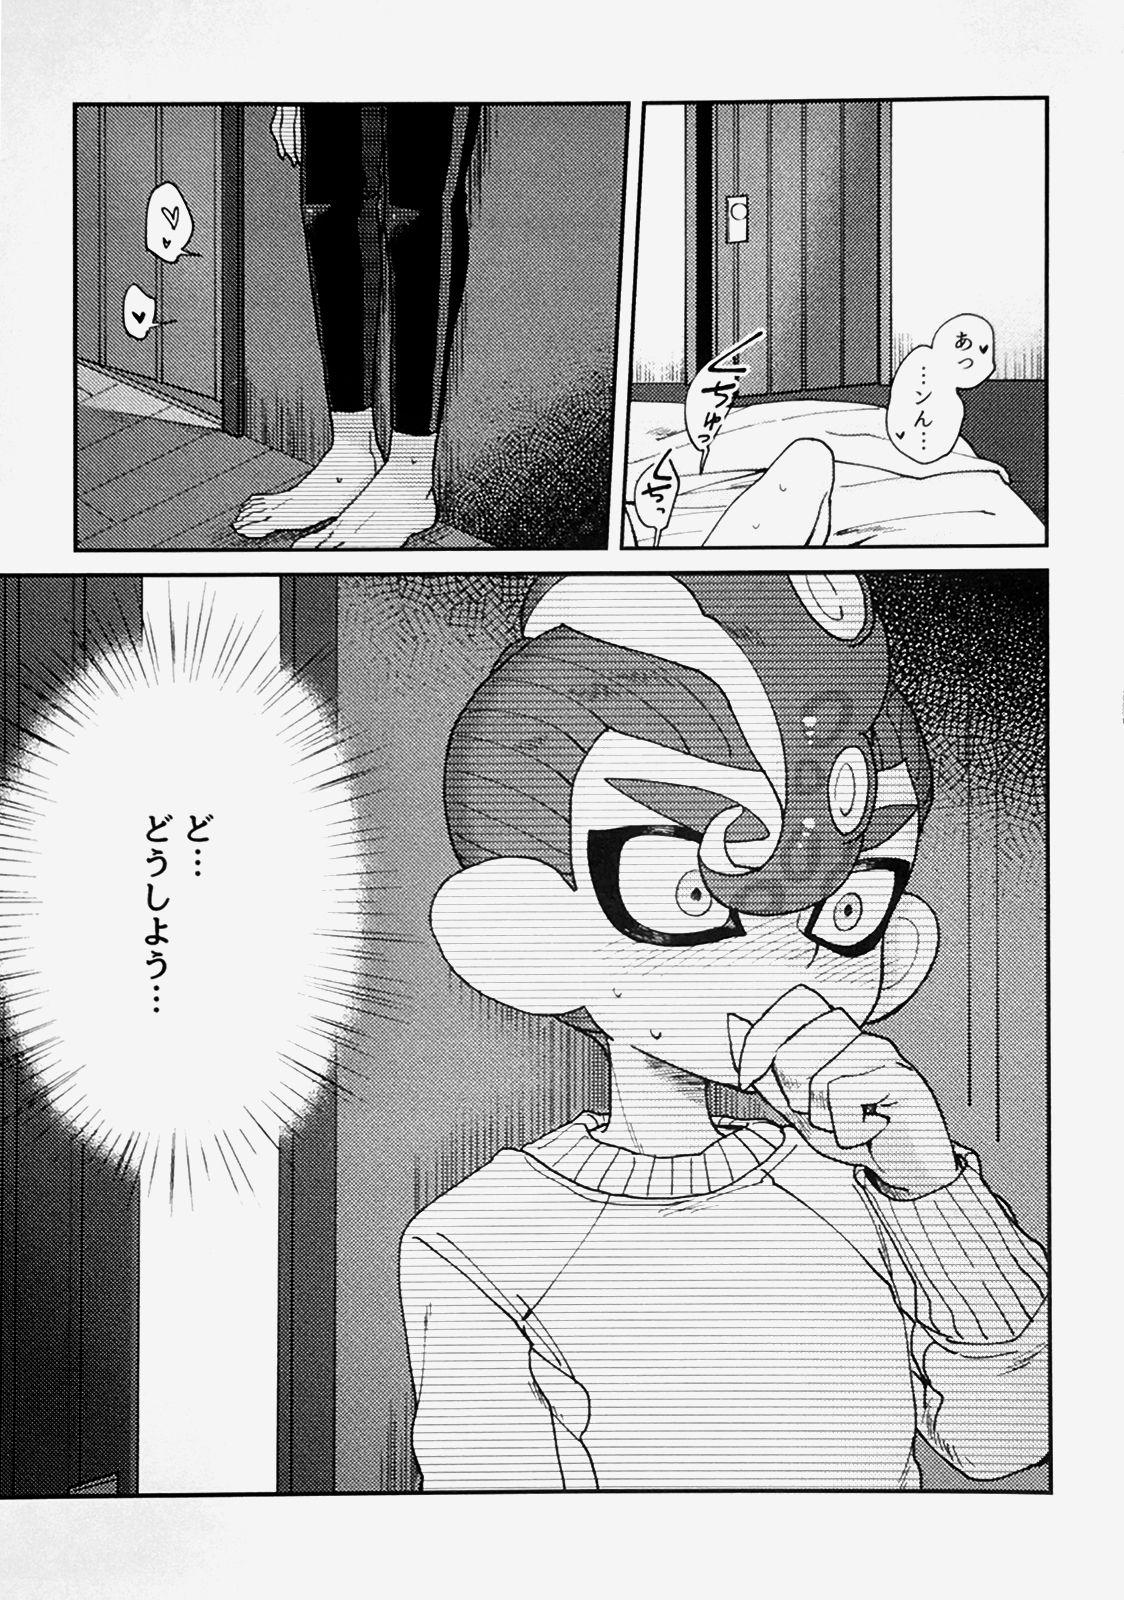 Stunning Immoral - Splatoon Free Rough Porn - Page 6